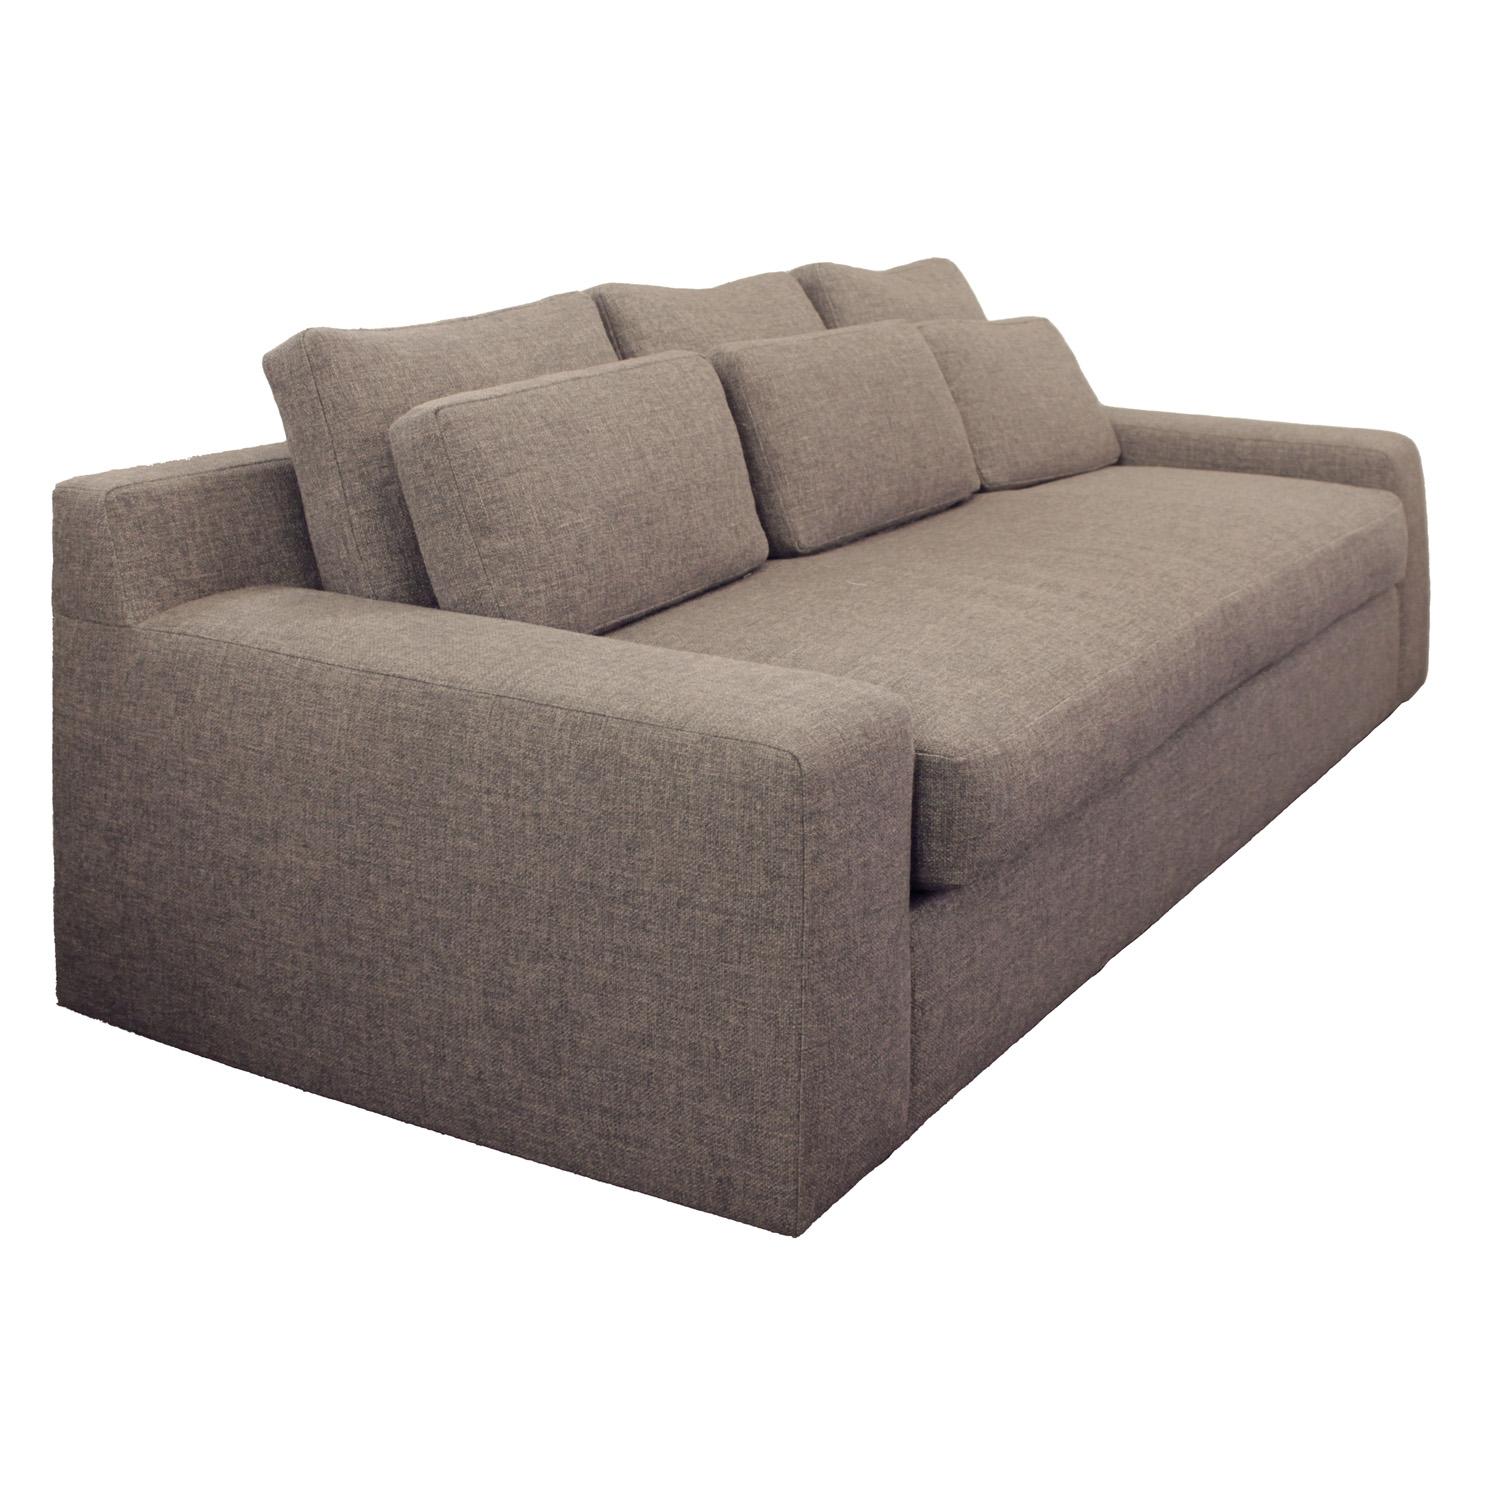 Stylish Modern sofa with 6 back pillows and low, wide arms. This sofa's deep single seat cushion is perfectly sized to serve as a daybed or single bed for the occasional overnight guest. Newly upholstered in stone gray Holly Hunt high performance